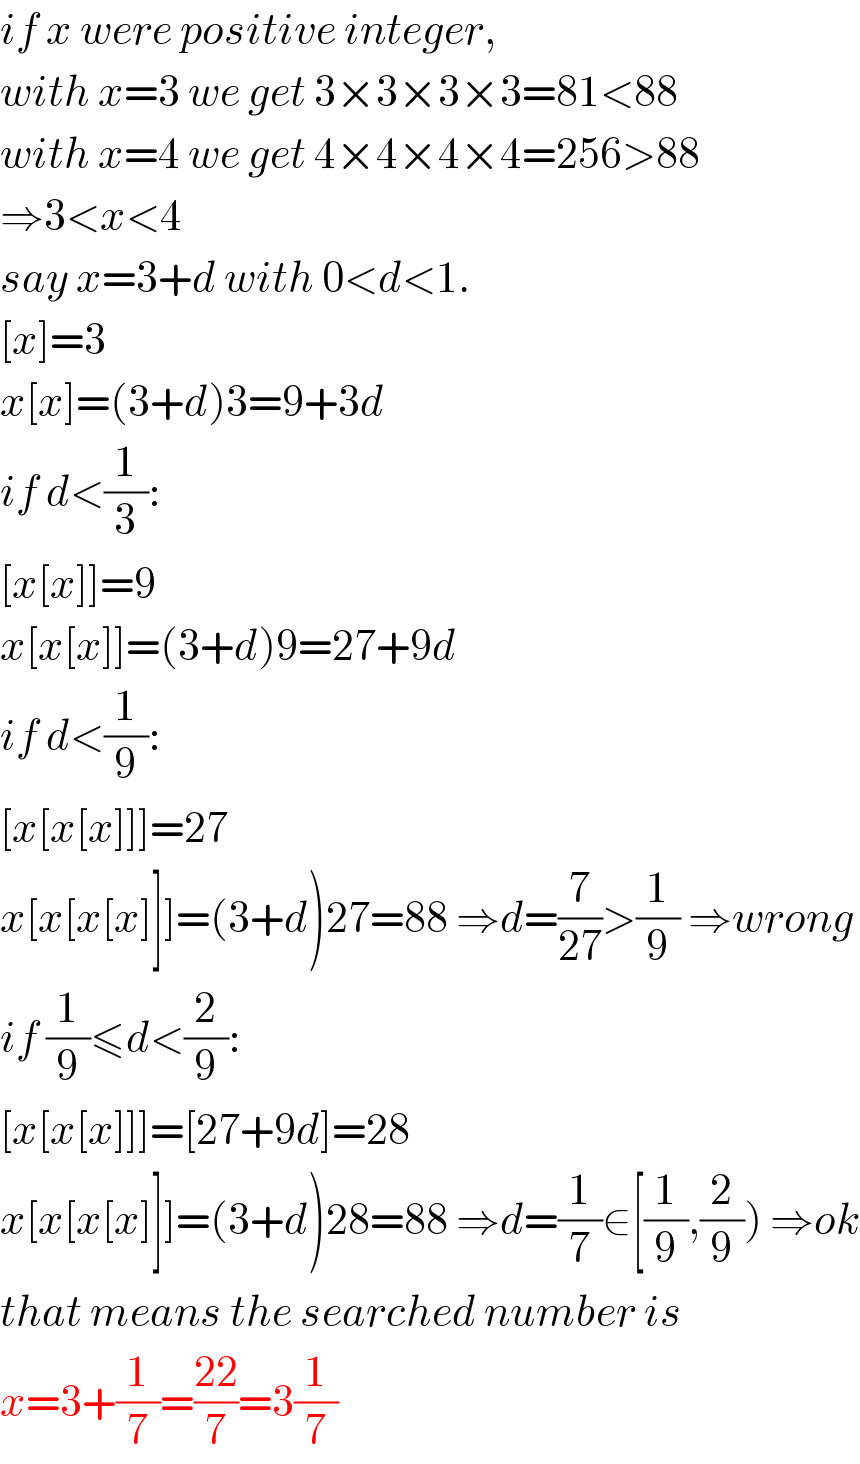 if x were positive integer,  with x=3 we get 3×3×3×3=81<88  with x=4 we get 4×4×4×4=256>88  ⇒3<x<4  say x=3+d with 0<d<1.  [x]=3  x[x]=(3+d)3=9+3d  if d<(1/3):  [x[x]]=9  x[x[x]]=(3+d)9=27+9d  if d<(1/9):  [x[x[x]]]=27  x[x[x[x]]]=(3+d)27=88 ⇒d=(7/(27))>(1/9) ⇒wrong  if (1/9)≤d<(2/9):  [x[x[x]]]=[27+9d]=28  x[x[x[x]]]=(3+d)28=88 ⇒d=(1/7)∈[(1/9),(2/9)) ⇒ok  that means the searched number is  x=3+(1/7)=((22)/7)=3(1/7)  